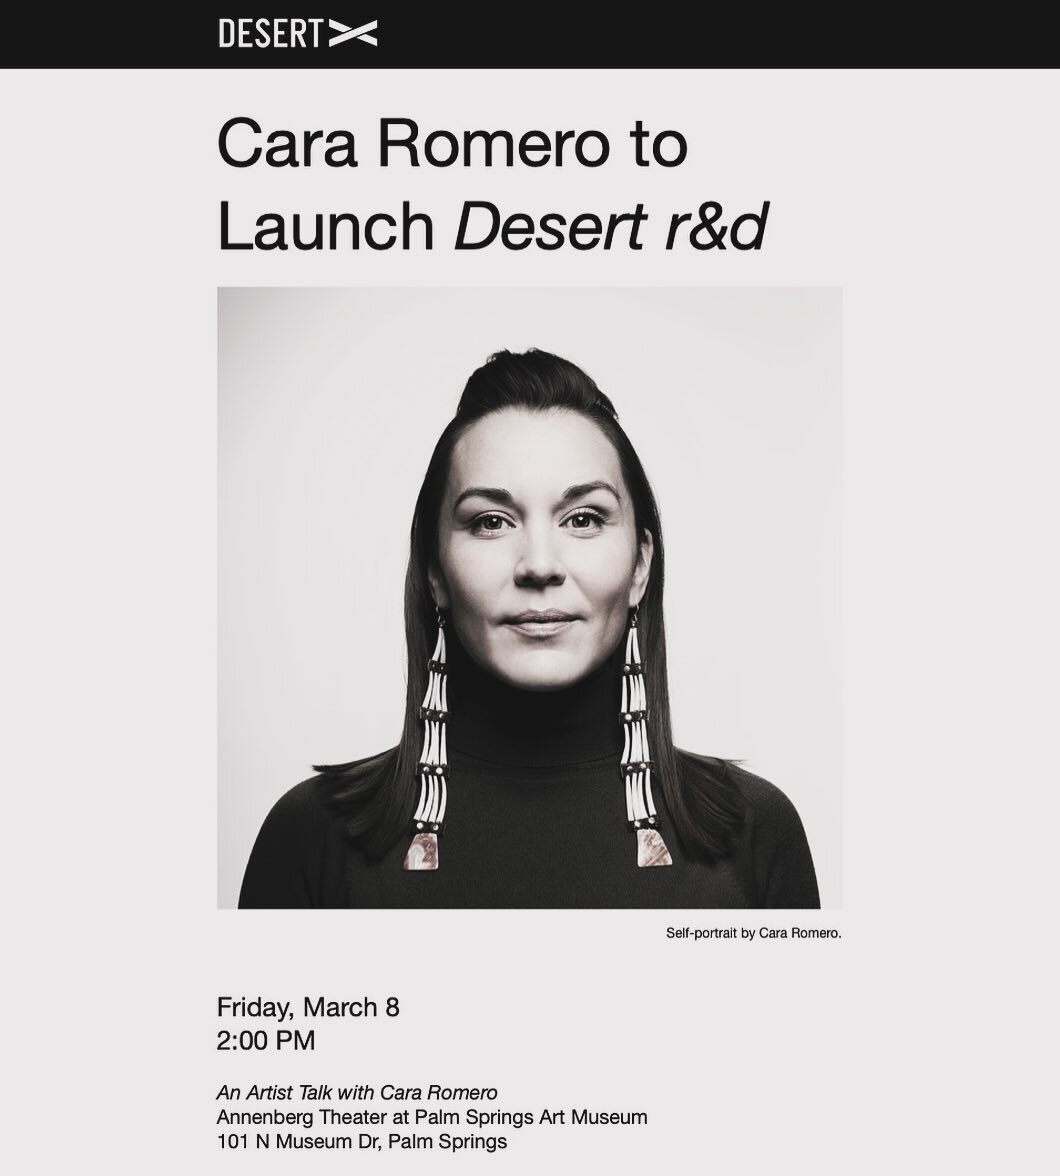 Come join me tomorrow for a keynote for the launch of r&amp;d&mdash;an event made possible by @_desertx and @psartmuseum Excited to be in the SoCal desert homelands of the @aguacalienteindians #calinative #aguacaliente #palmspringslife #chemehuevi #p